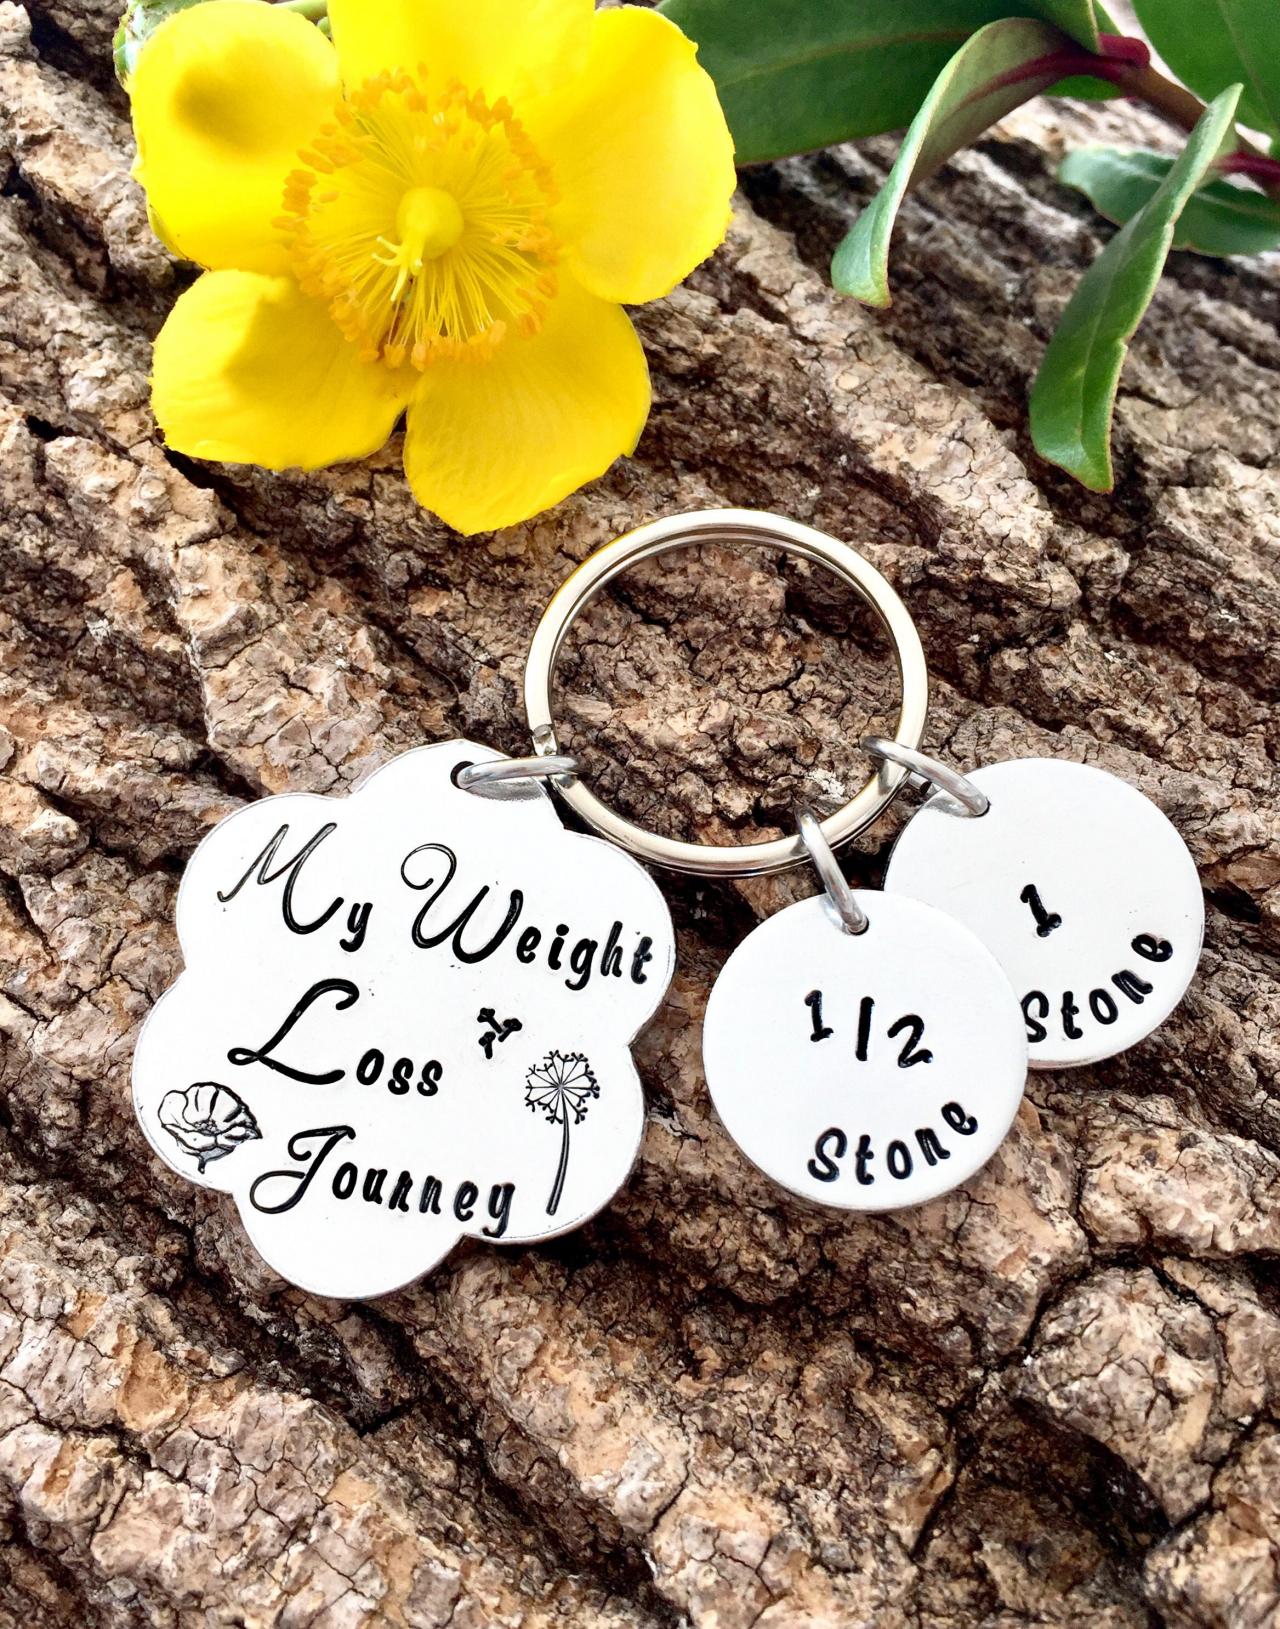 Weight Loss Keyring, Weight Loss, Inspire, Dream, Believe, Slimming, Motivation, Weight Loss Motivation, Achieve, Weight Loss Inspiration,